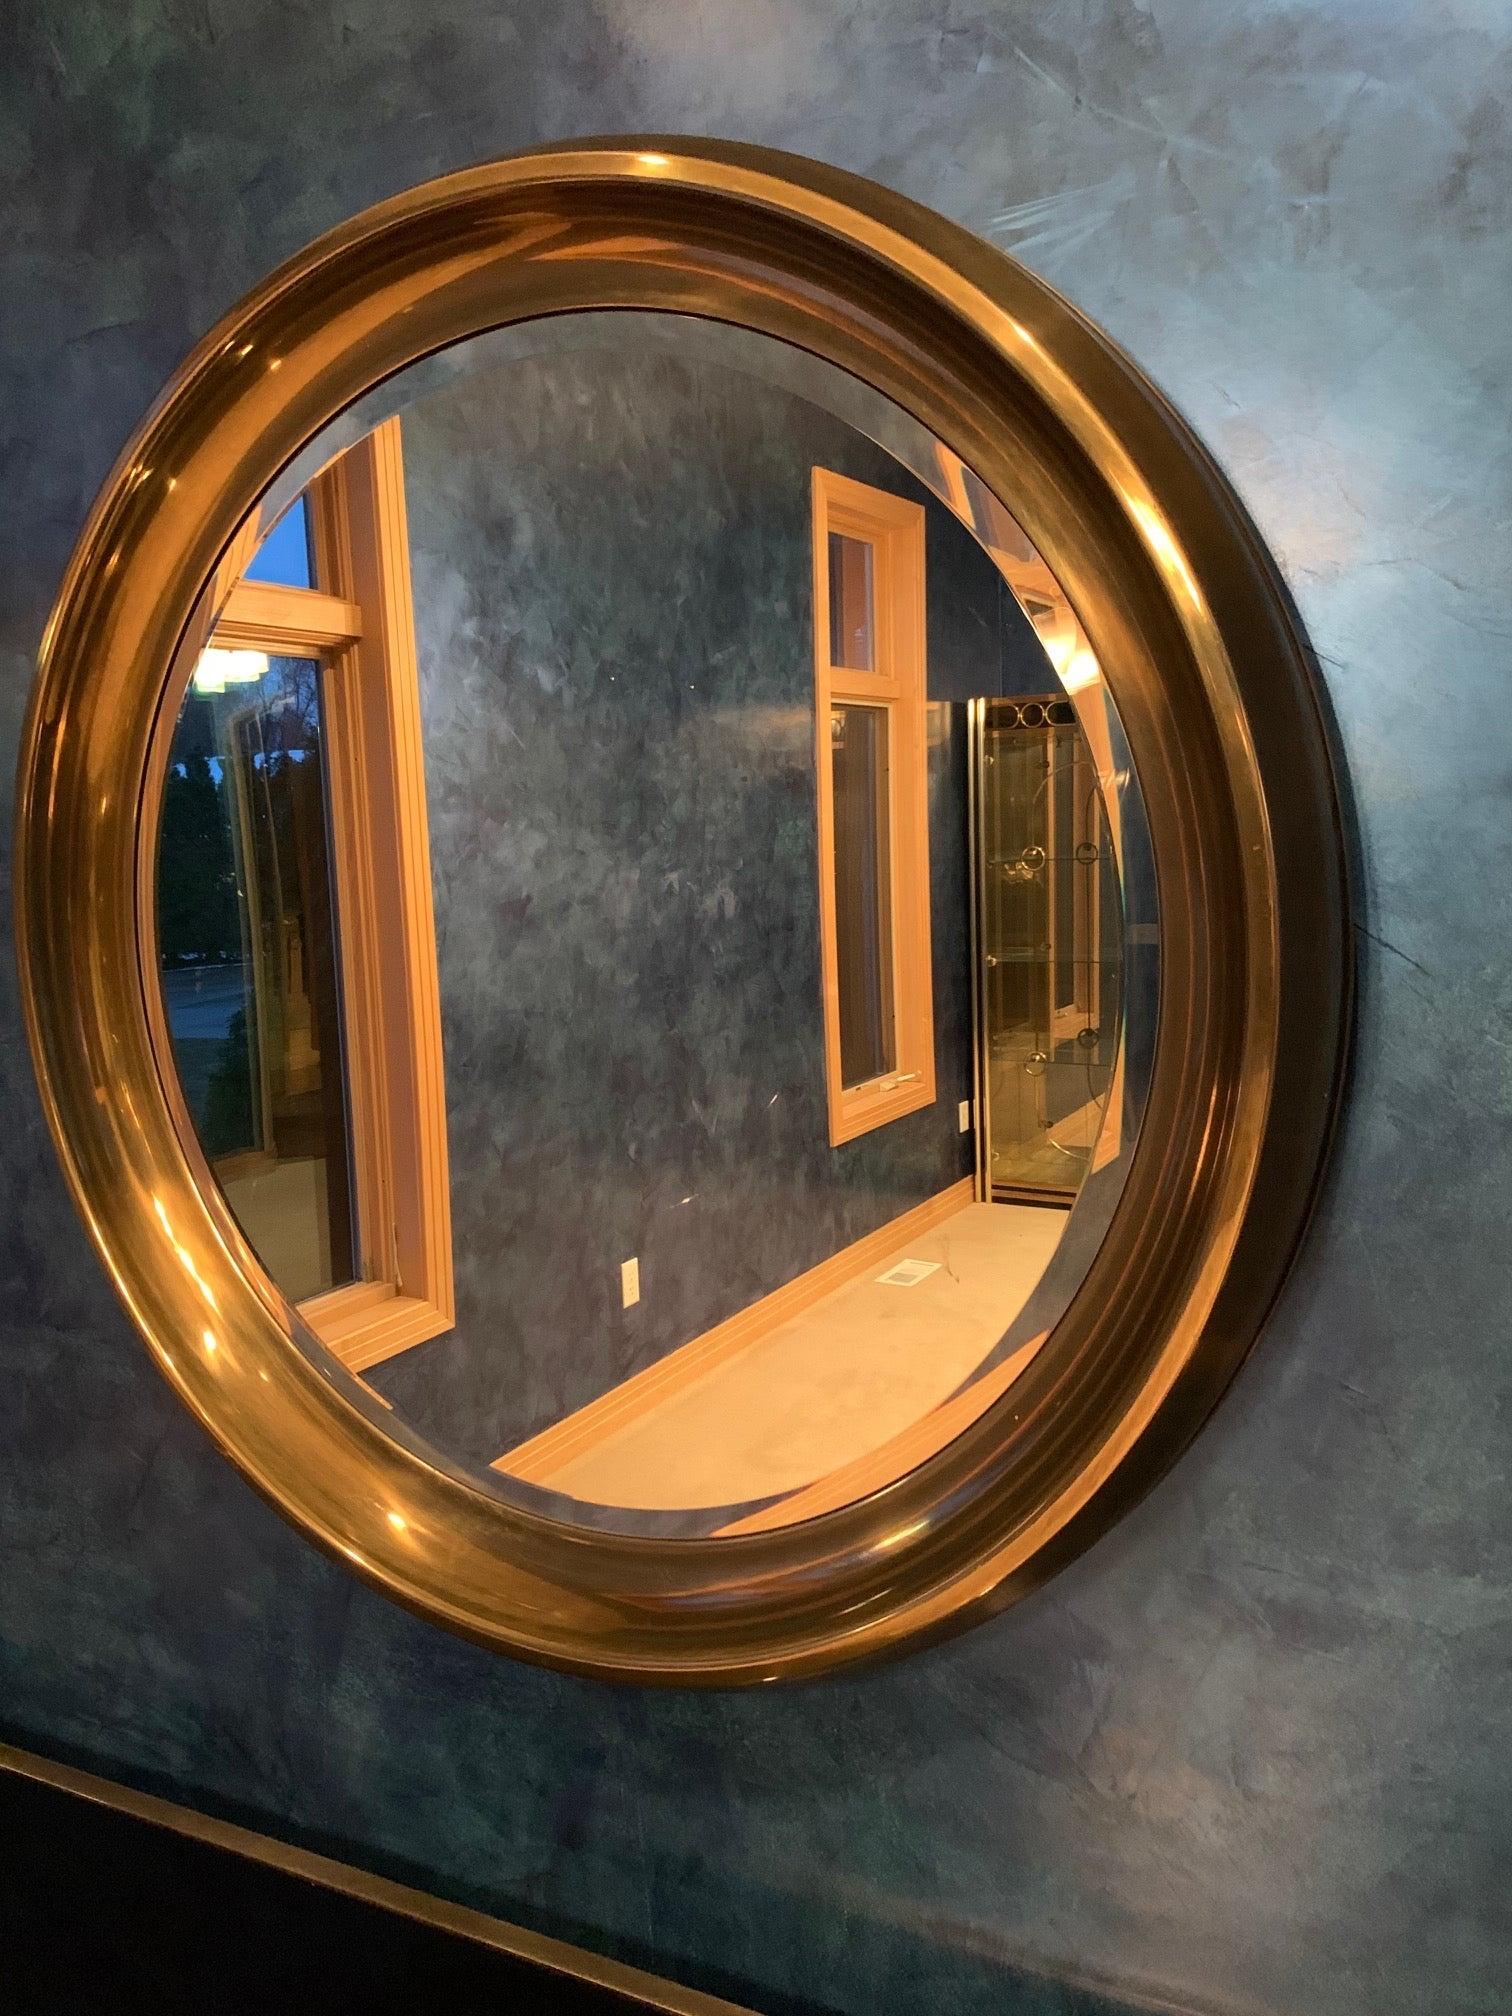 Oversize vintage 1970's mirror by William Doezema for Mastercraft in a wide rimmed patinated brass moulded frame featuring an inset circular beveled mirror.
  